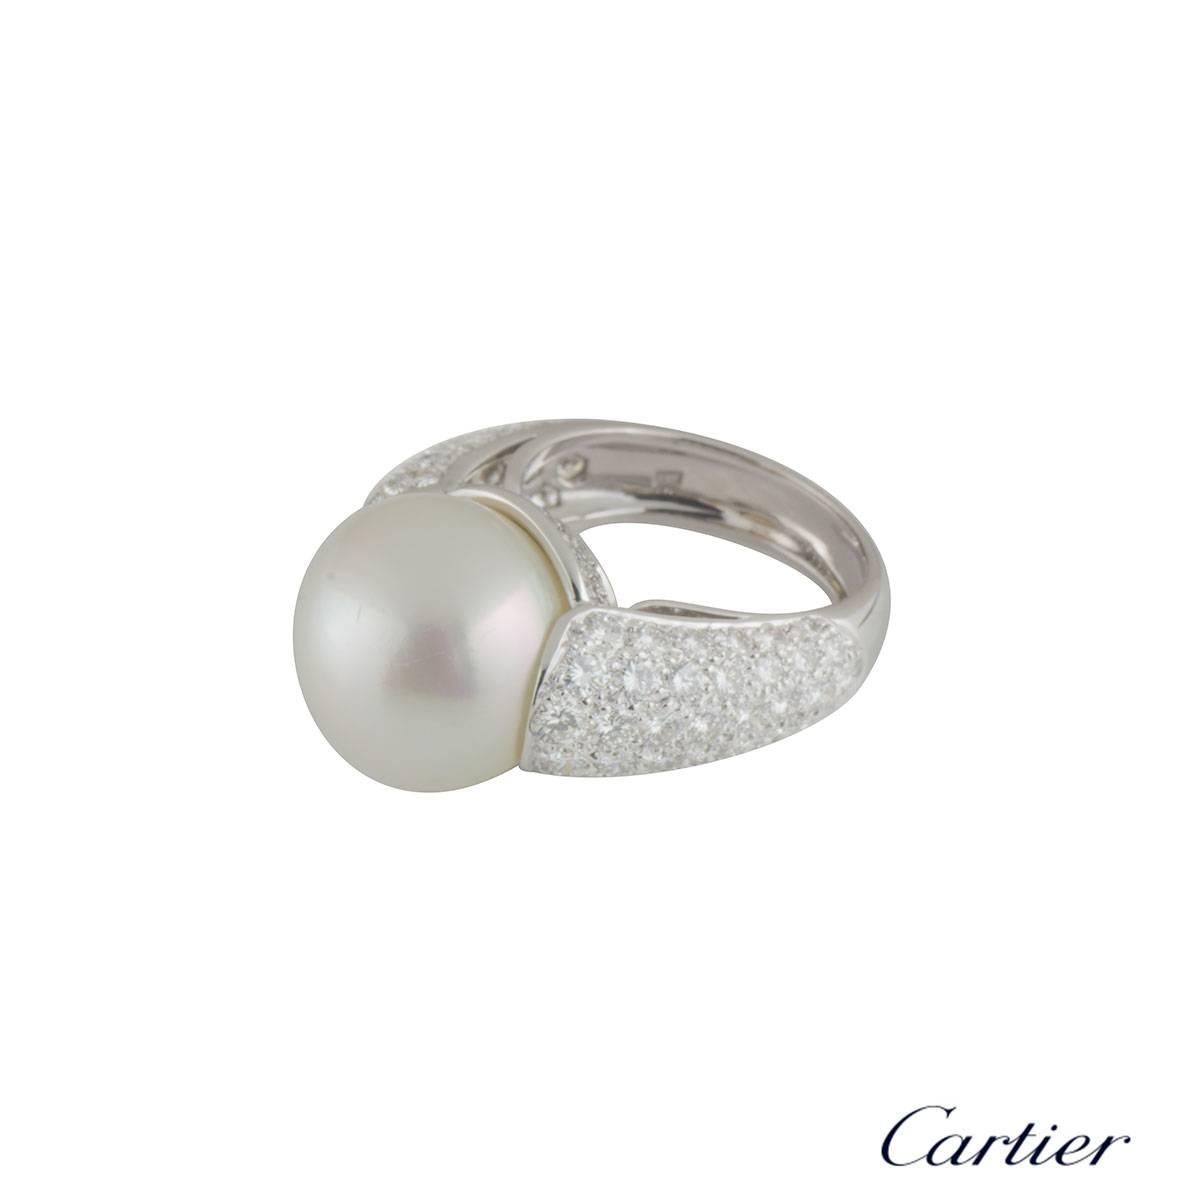 A beautiful 18k white gold Cartier pearl and diamond dress ring. The ring comprises of a pearl set to the centre measuring approximately 14mm in diameter. Complementing the pearl are 110 round brilliant cut diamonds in a pave setting down the